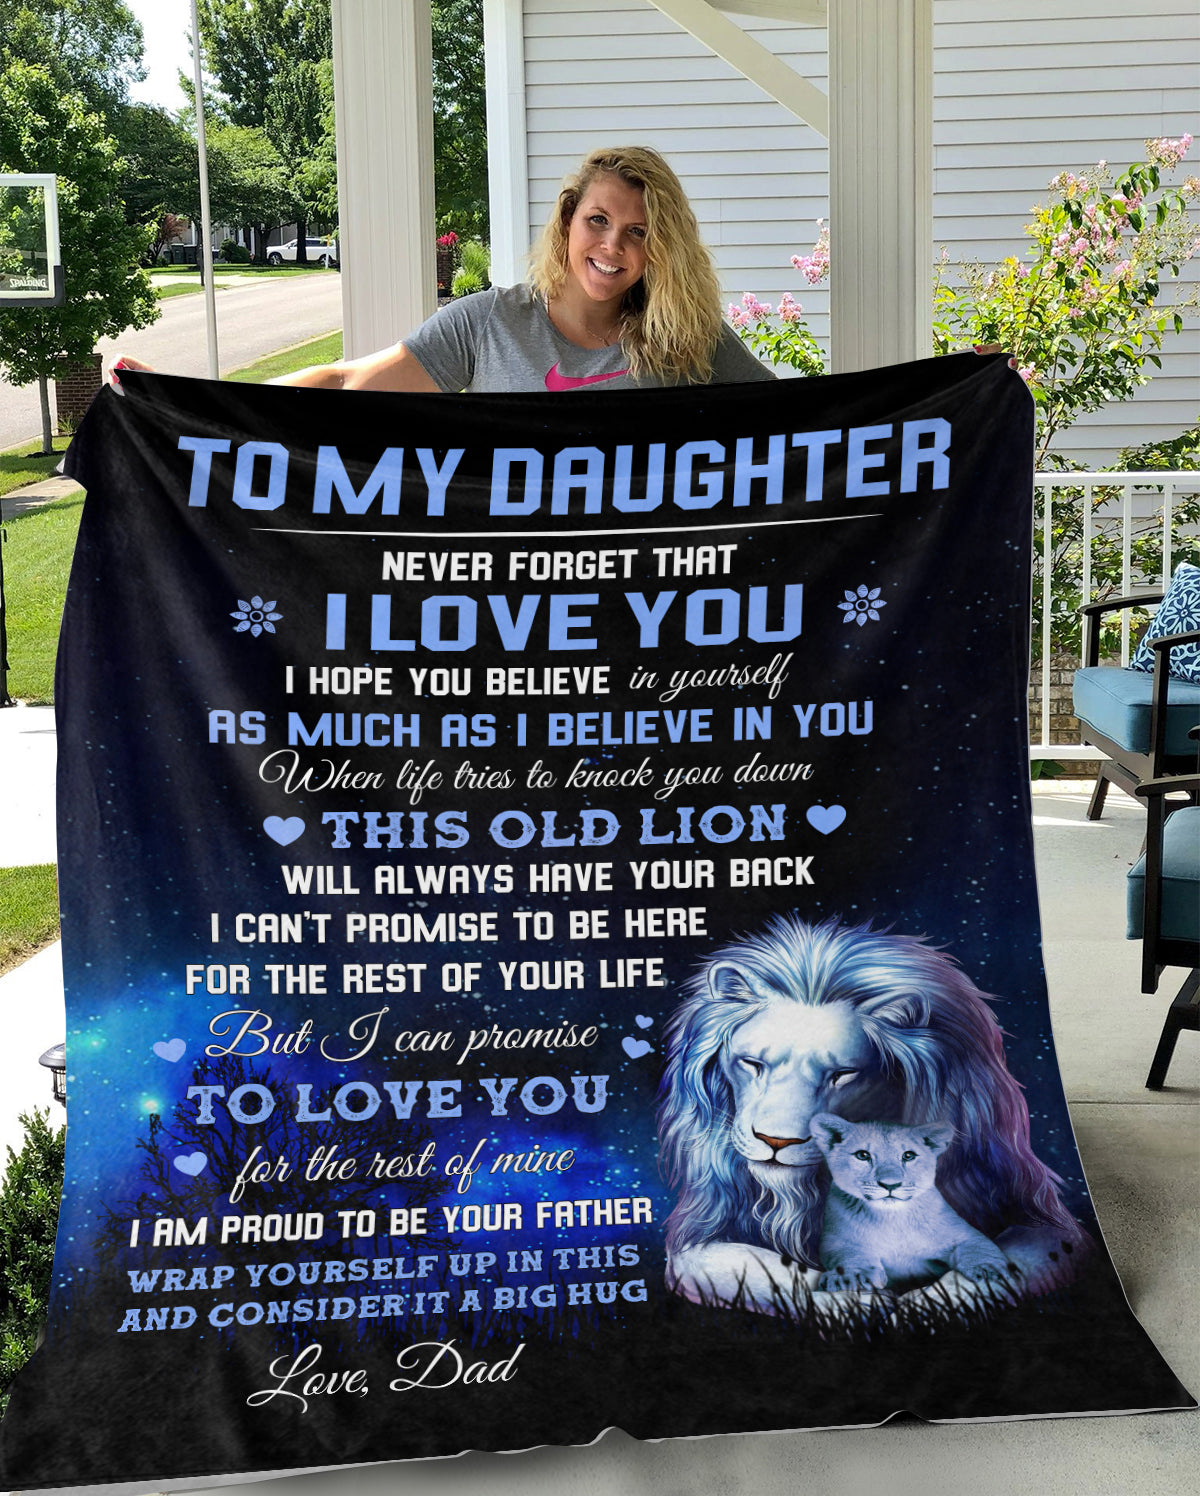 To My Daughter from Dad - This Old Lion Cozy Throw Blanket- Cozy Plush Fleece Blanket - 50x60 in.